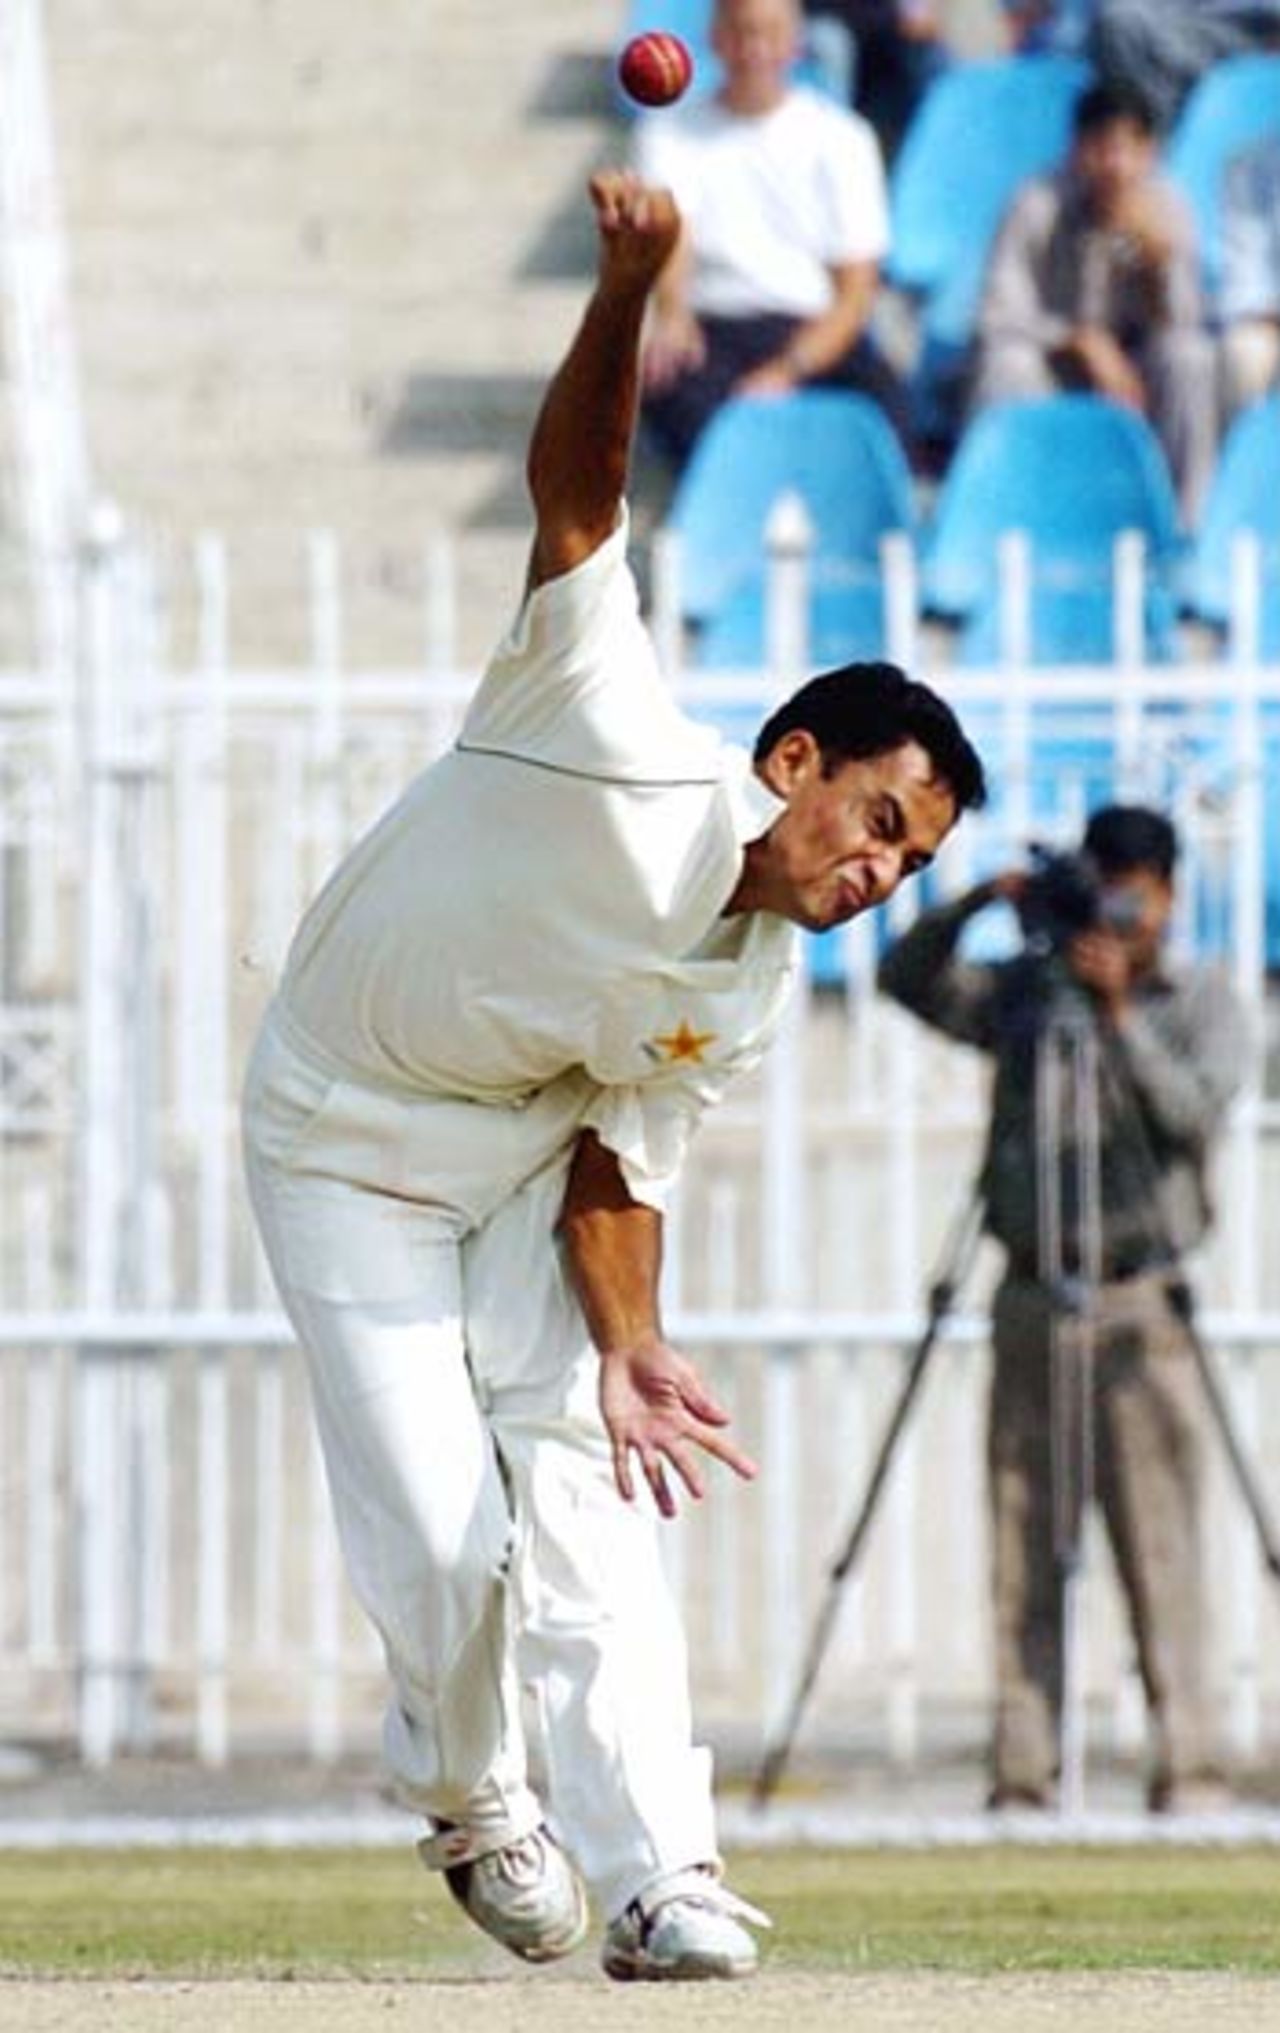 Yasir Arafat in action on his way to 5 for 31. He finished with impressive match figures of 9 for 76, Patron's XI v England XI, Rawalpindi, November 2, 2005